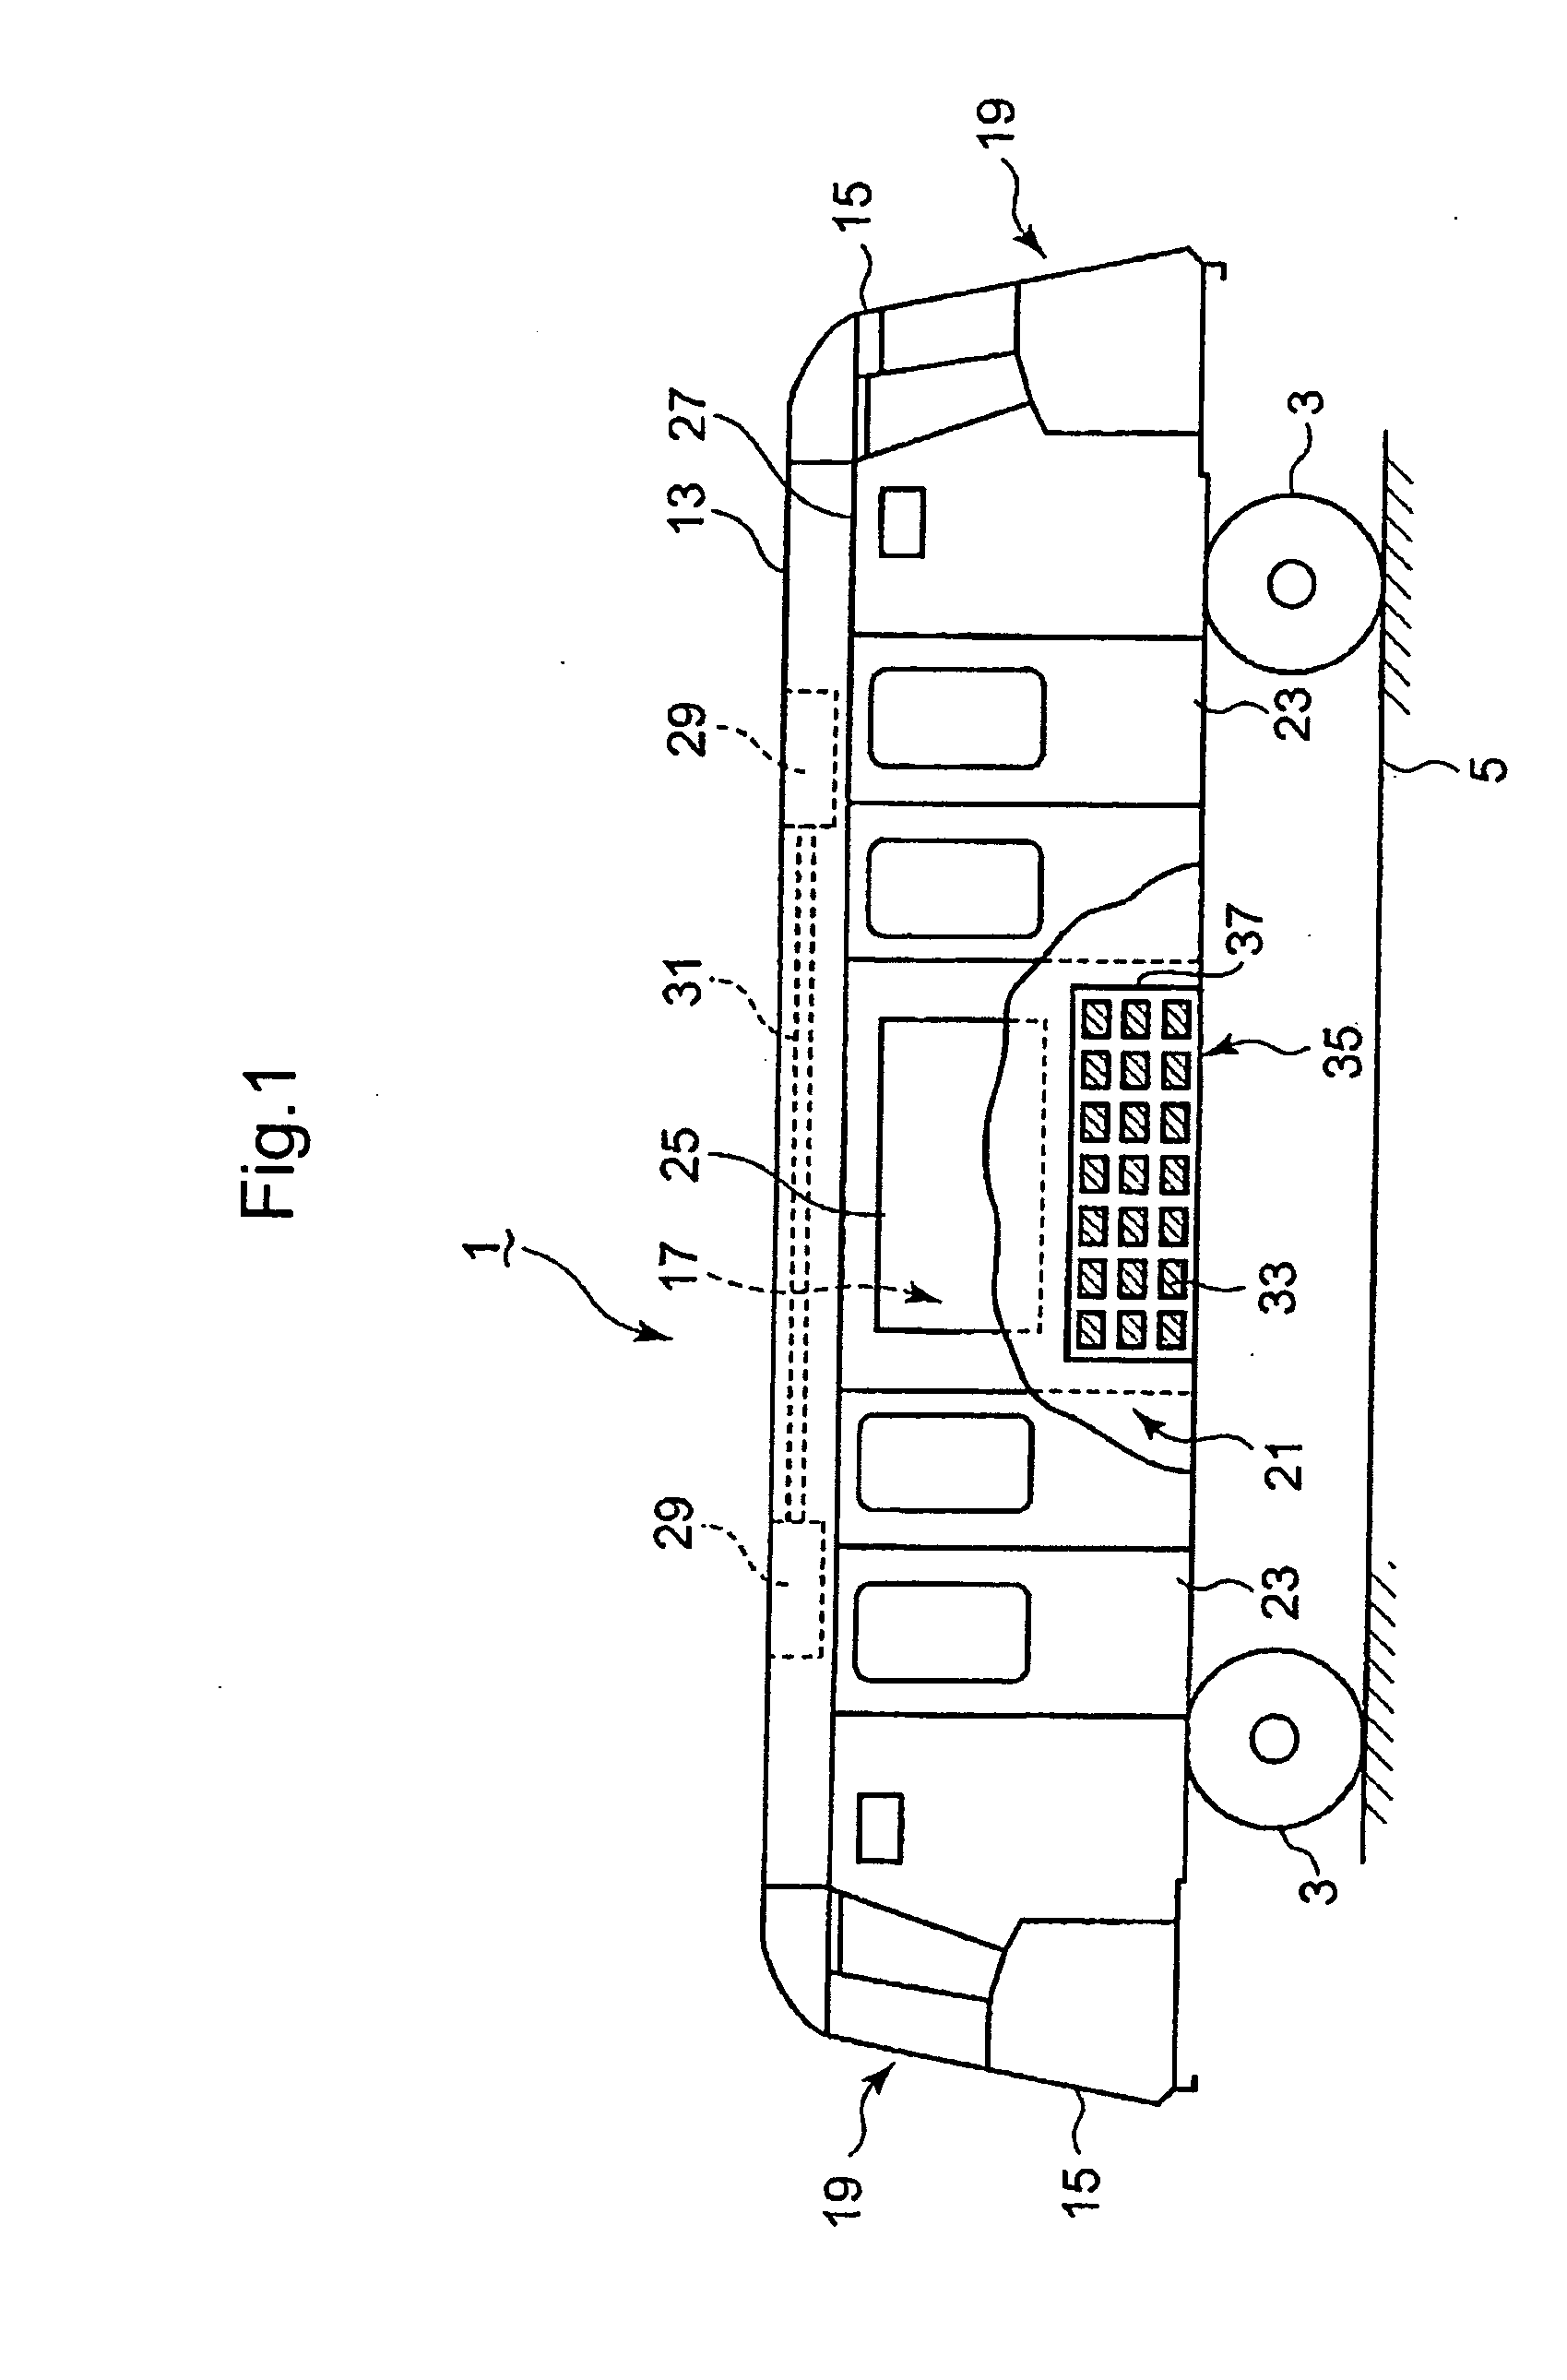 Structure for mounting batteries in guideway electric vehicle